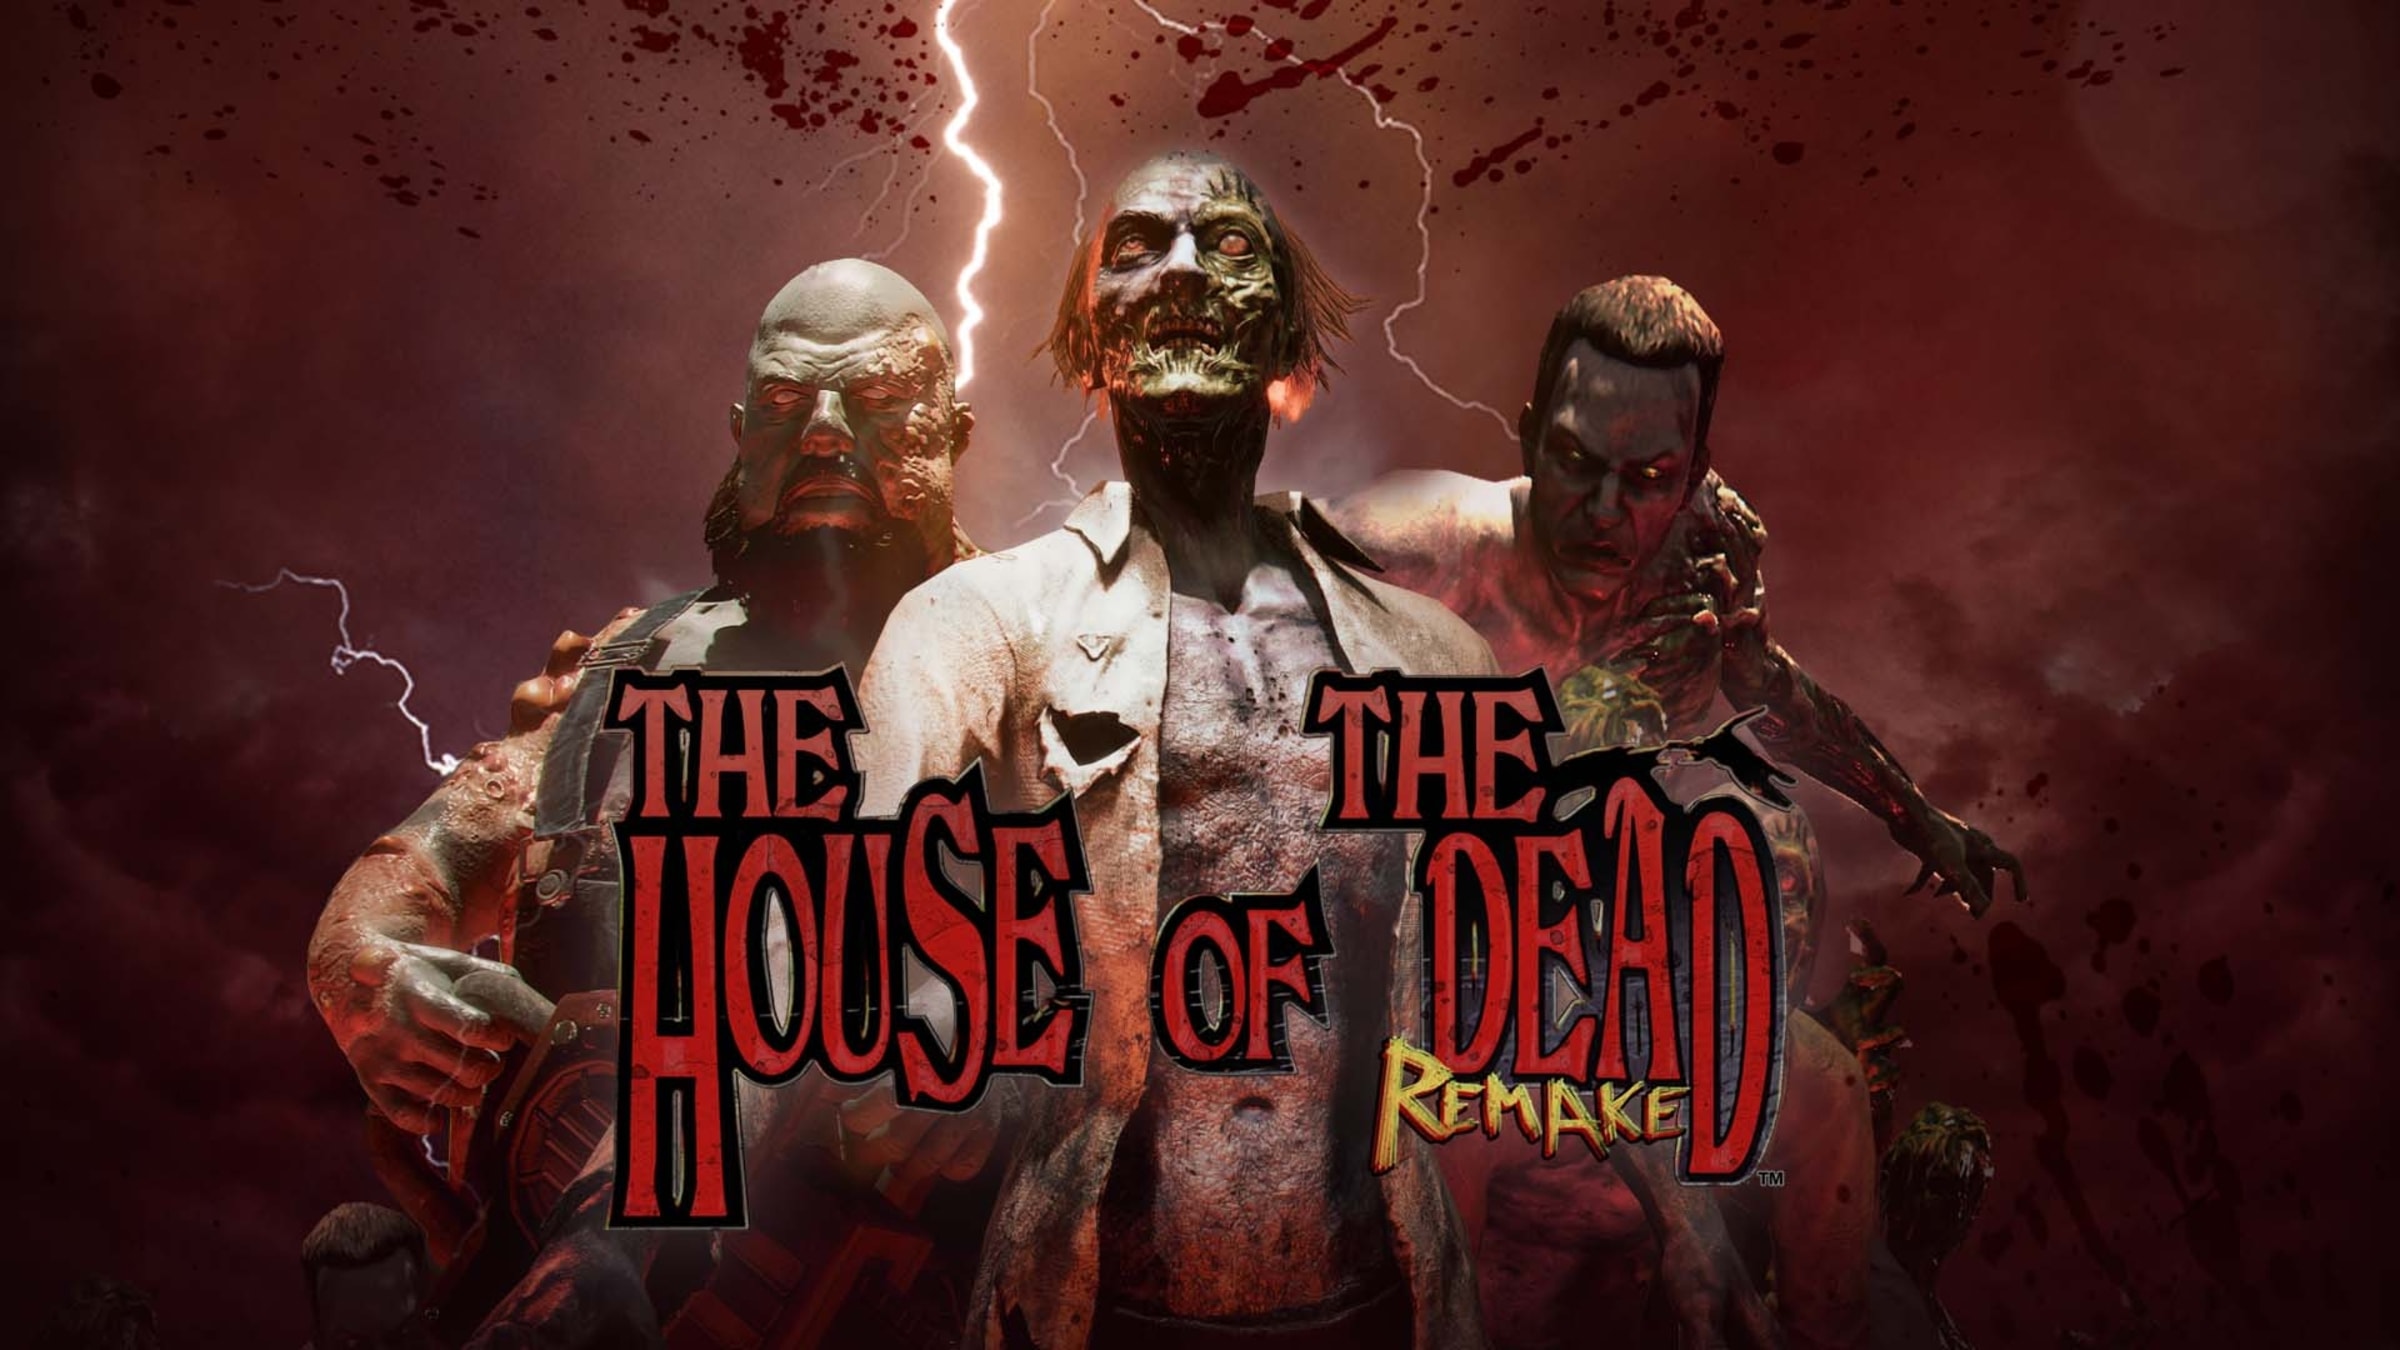 THE HOUSE OF THE DEAD: Remake (Nintendo Switch Digital Download) $12.49